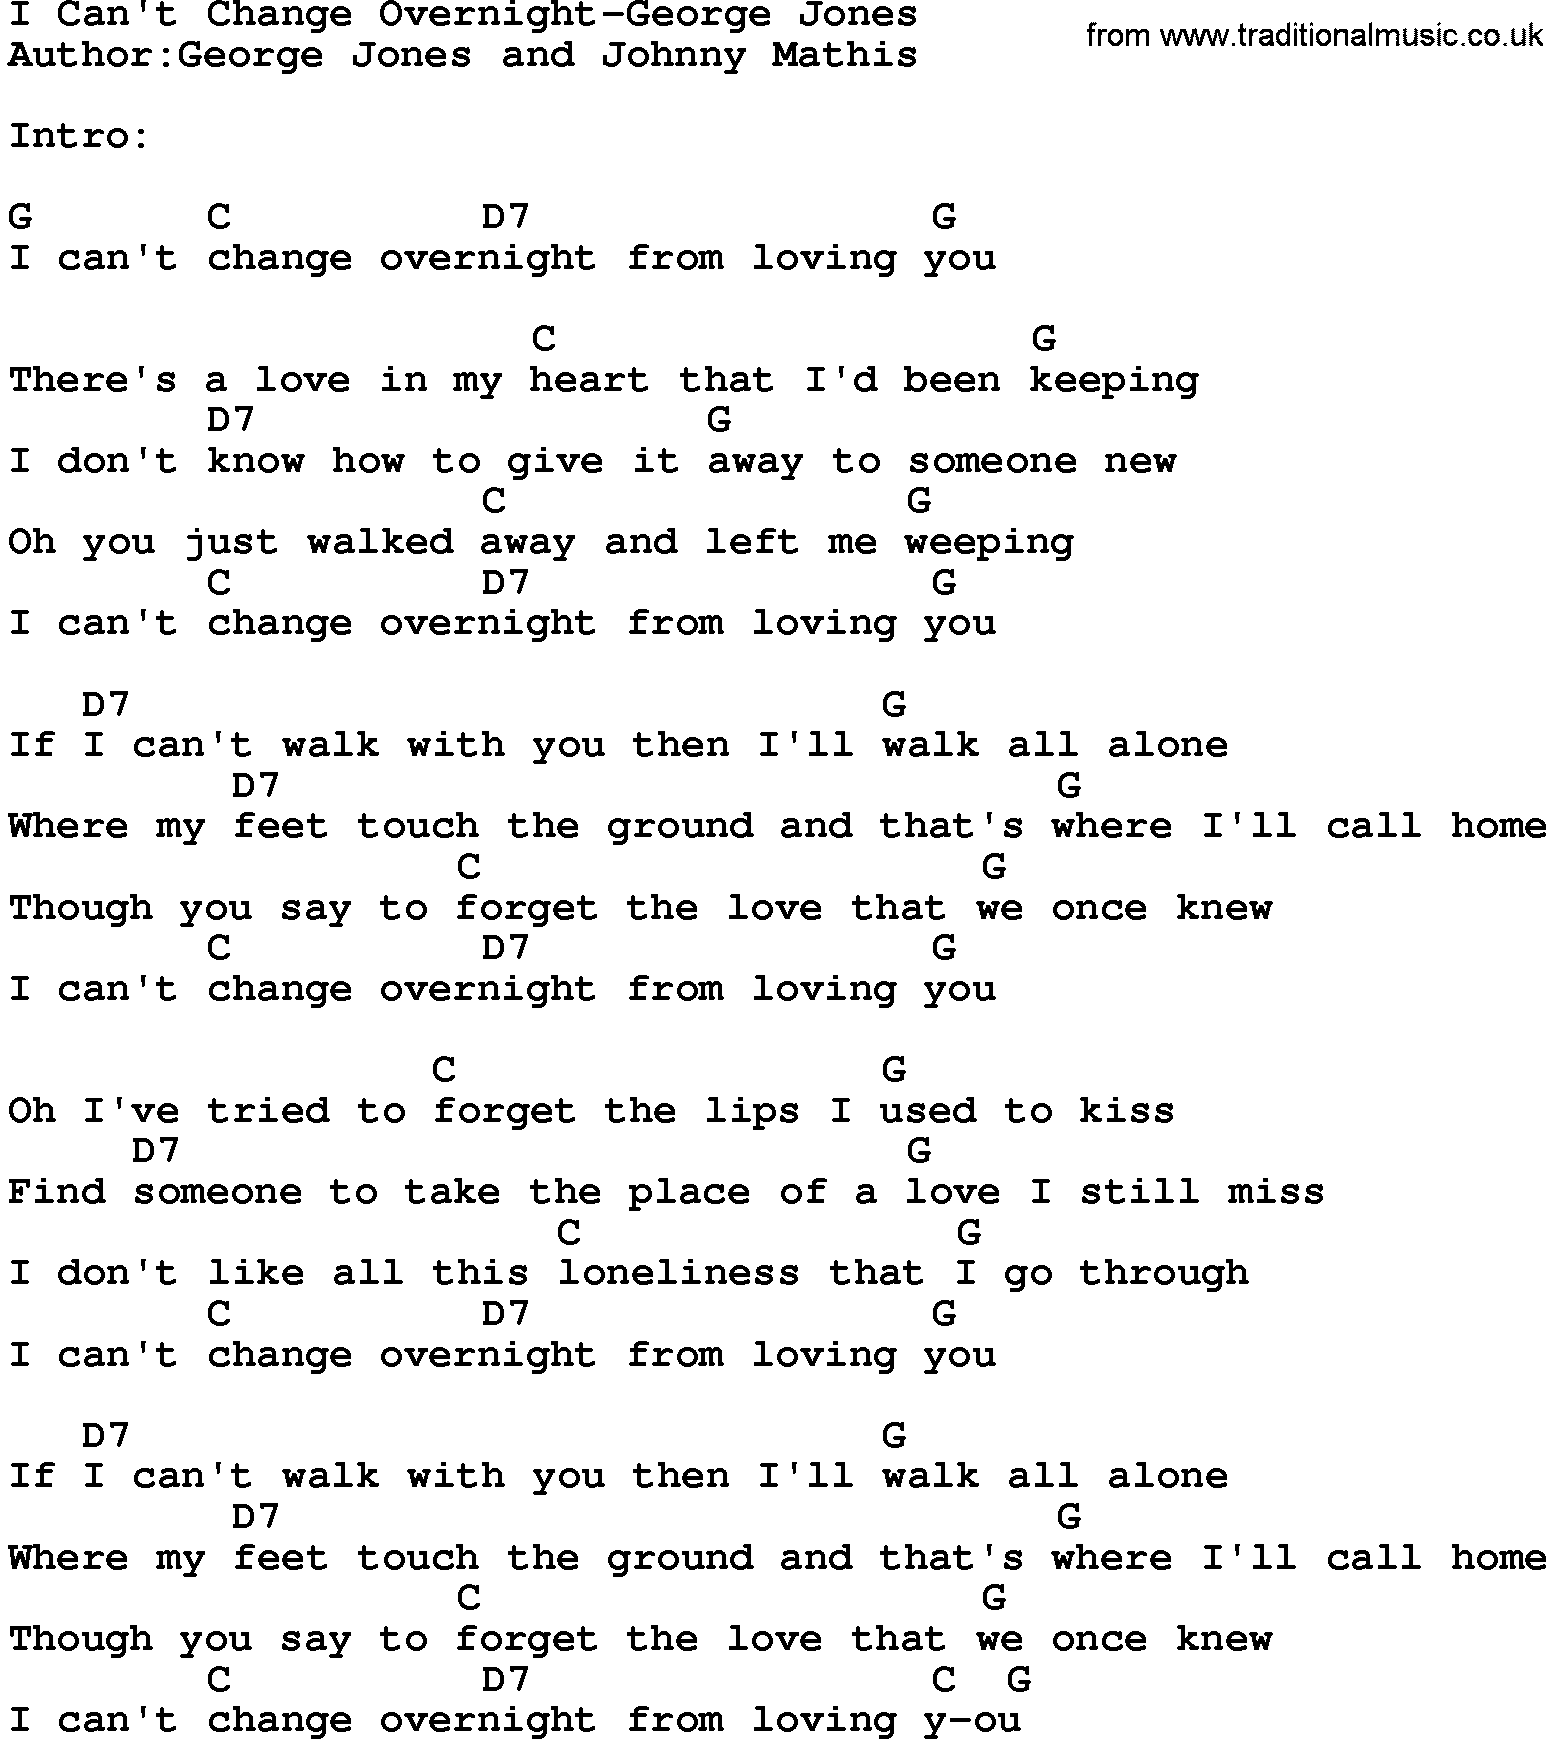 Country music song: I Can't Change Overnight-George Jones lyrics and chords